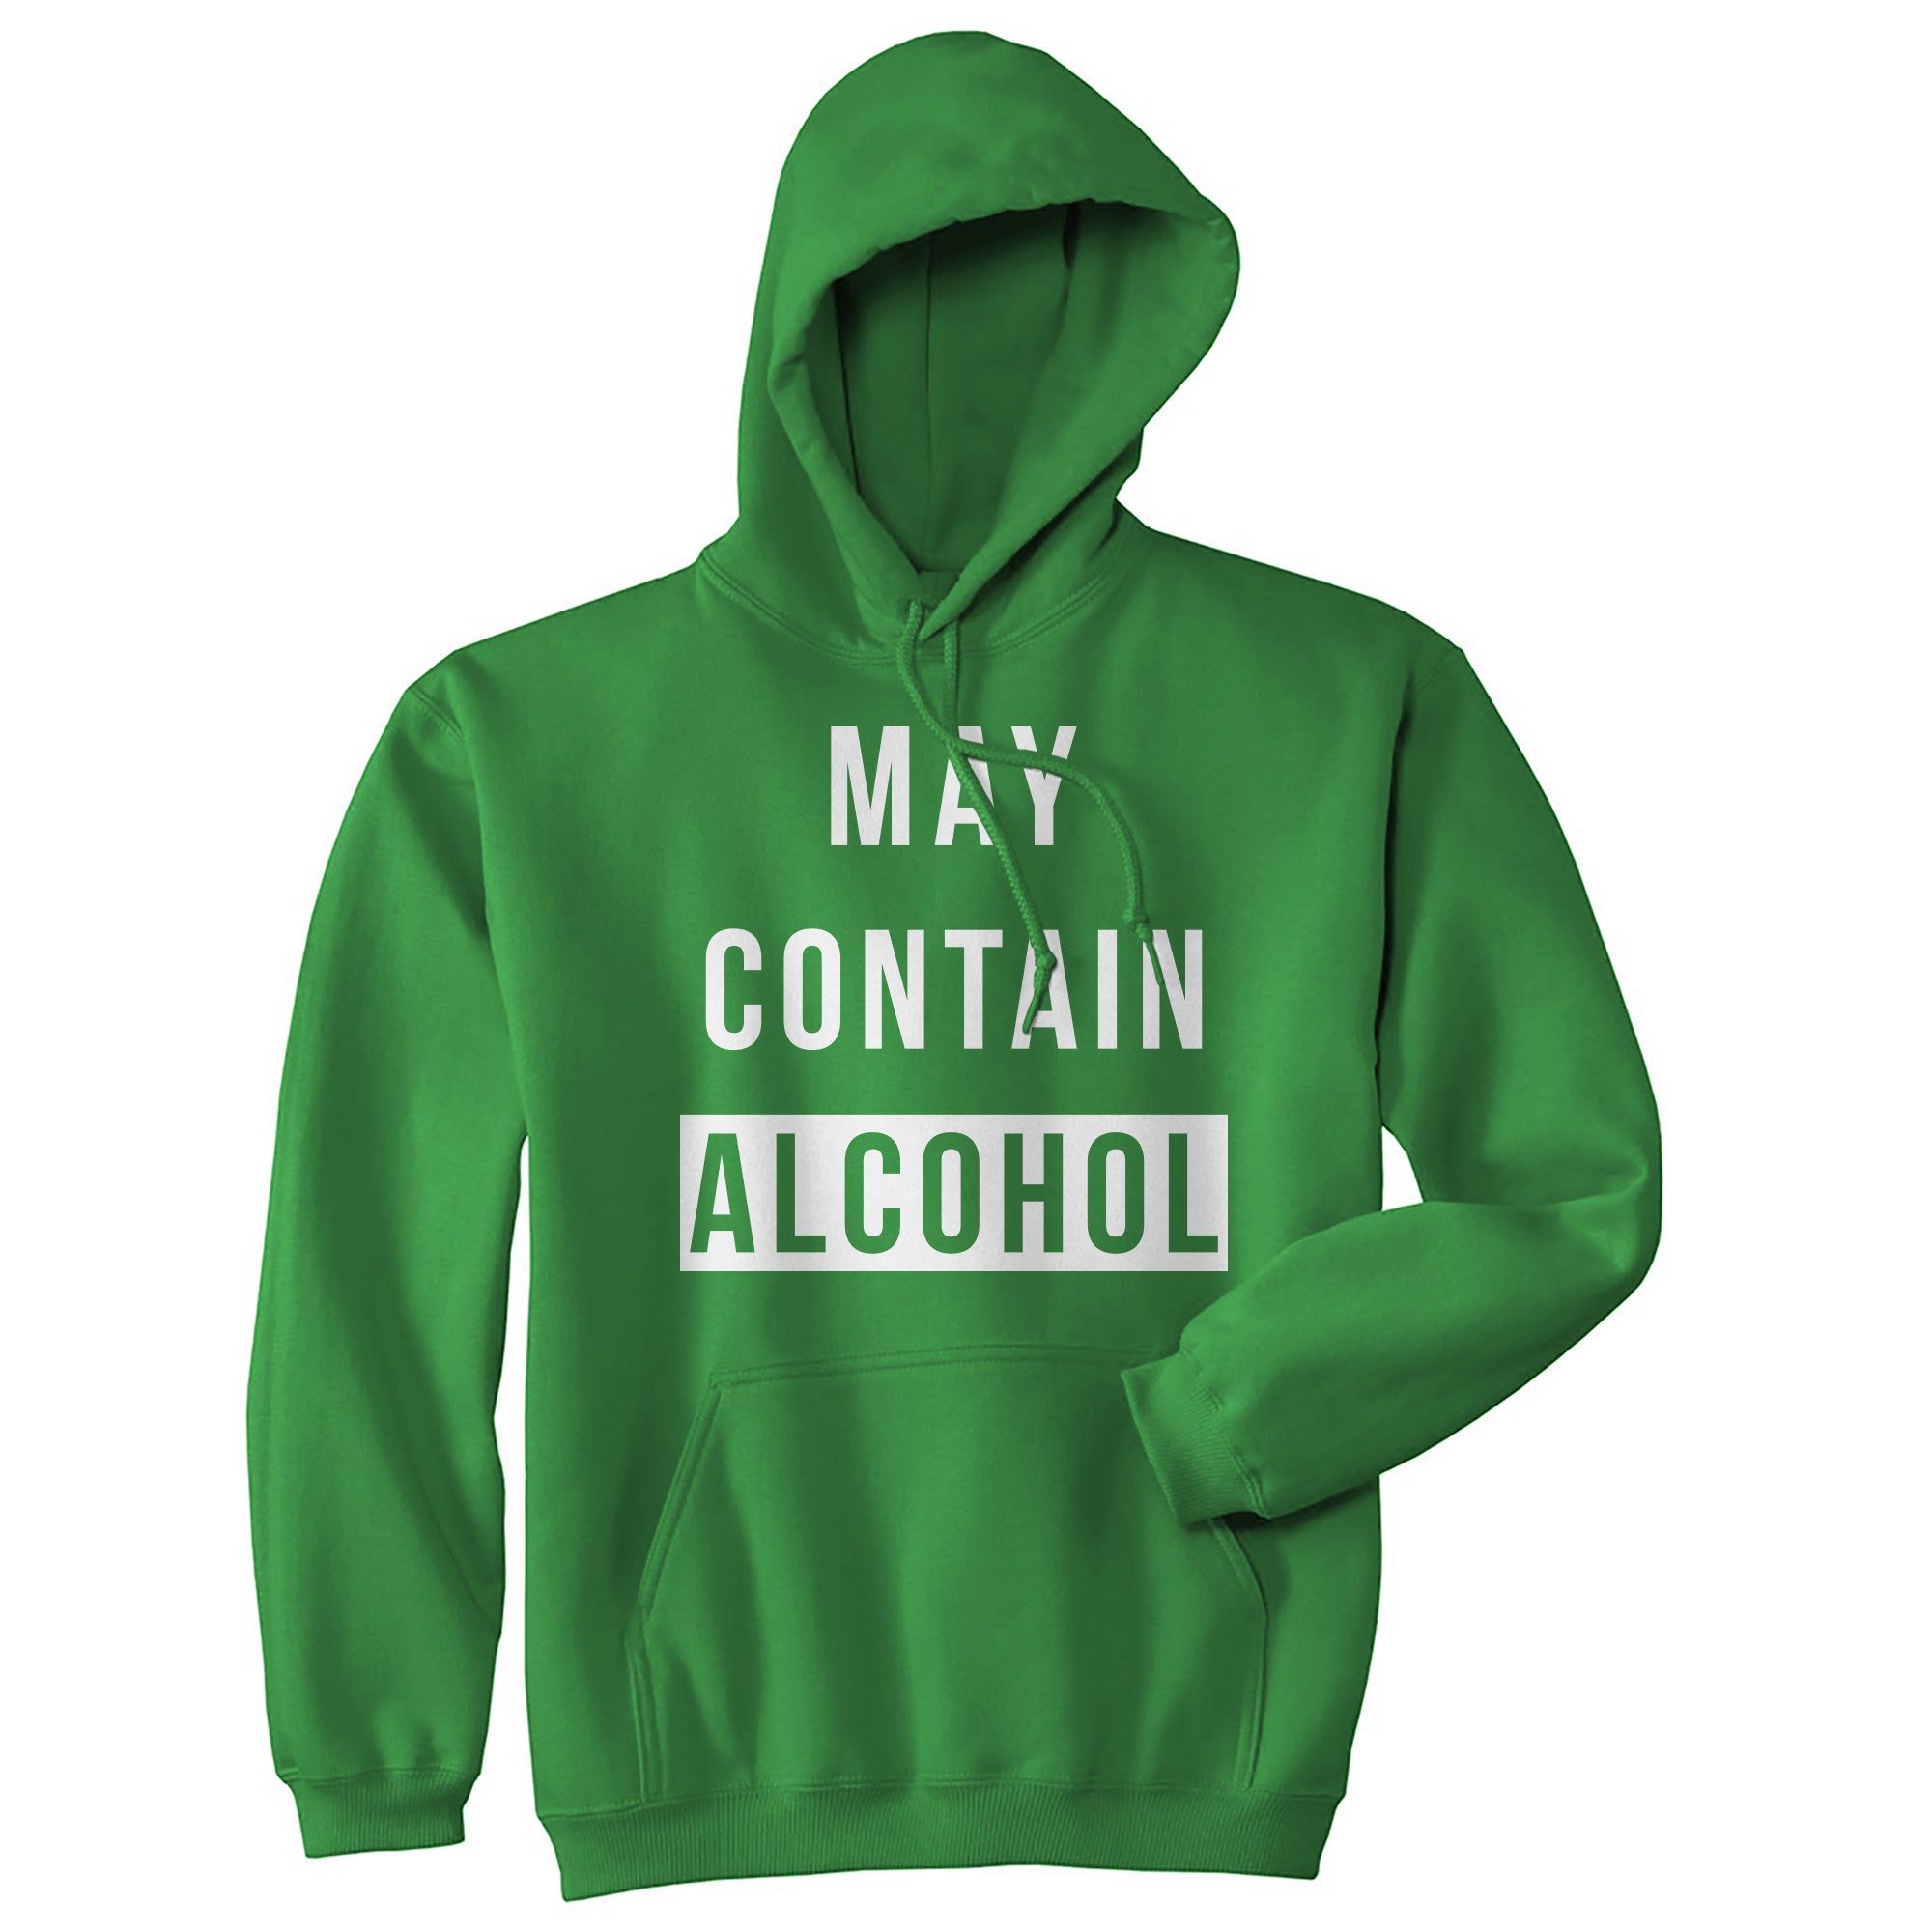 Funny Green May Contain Alcohol Hoodie Nerdy Saint Patrick's Day Drinking Tee